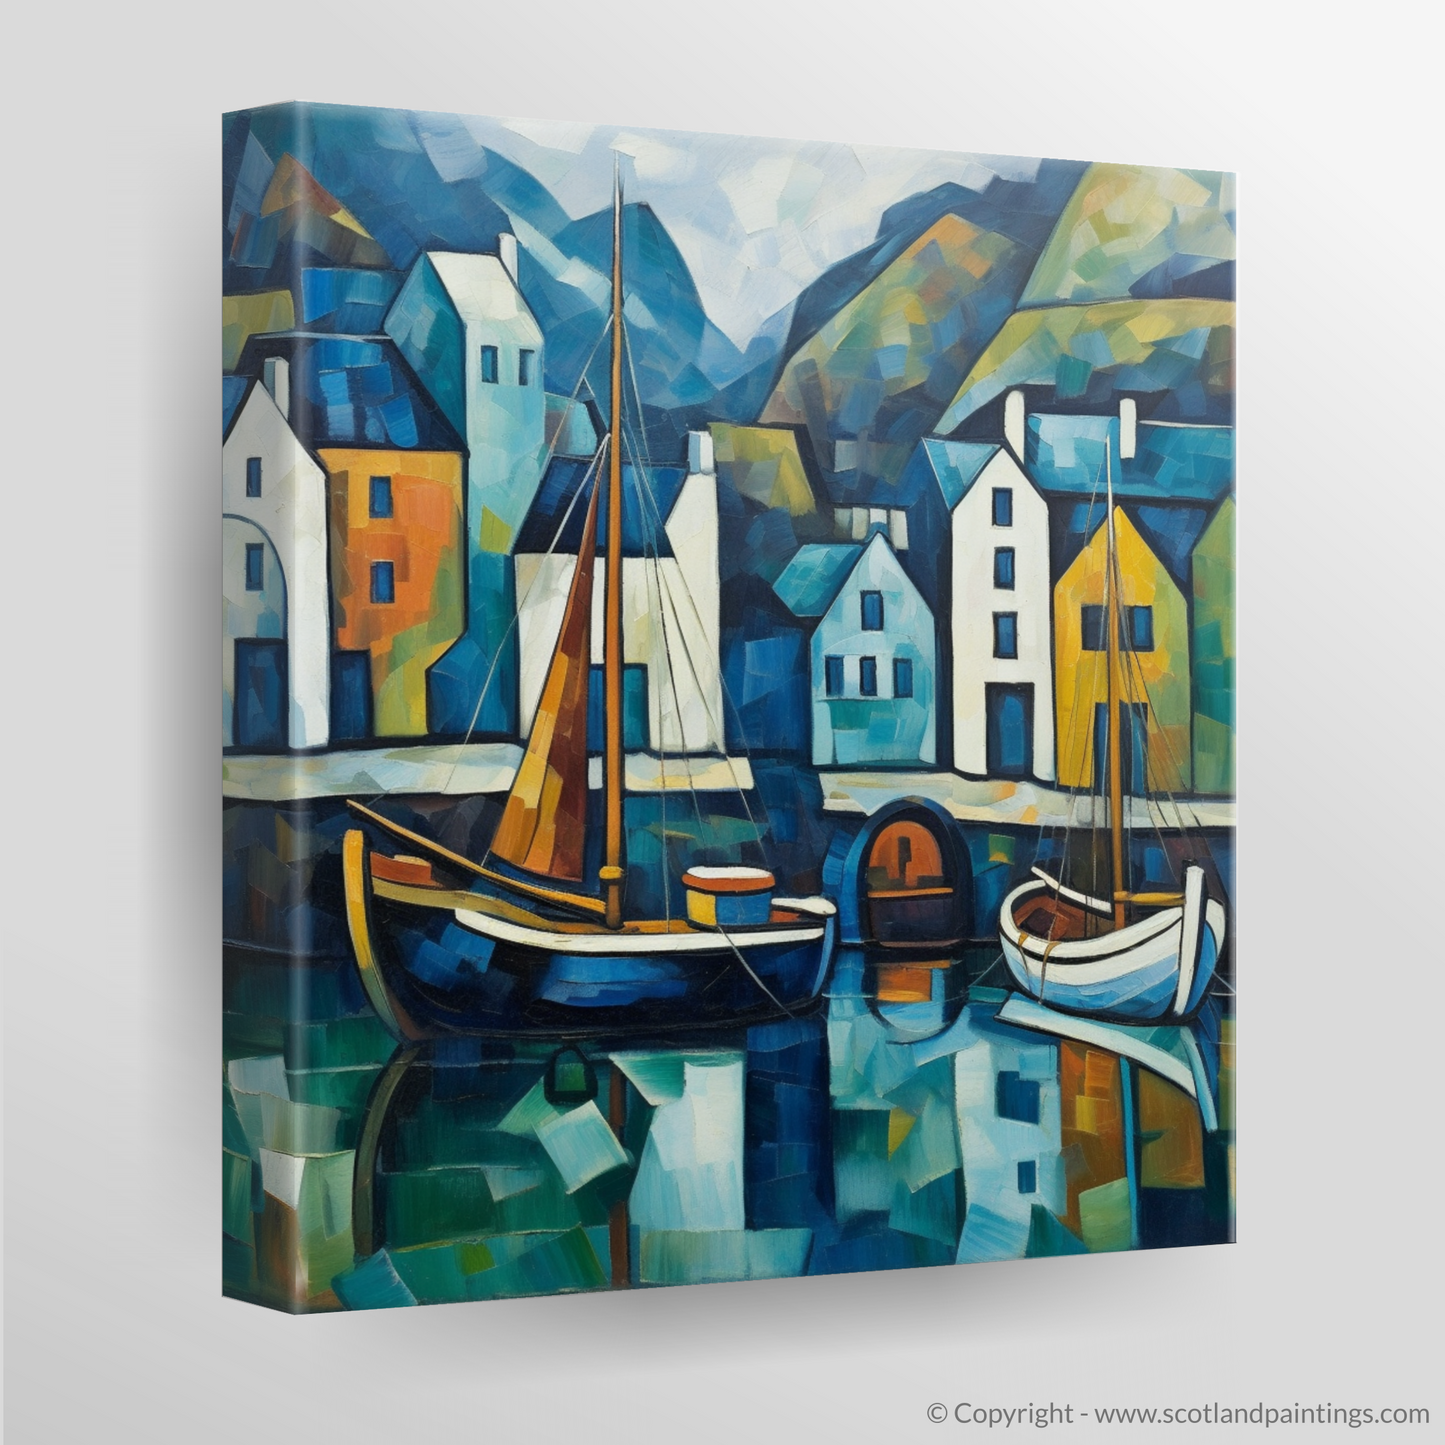 Cubist Portree: A Geometric Ode to the Scottish Harbour